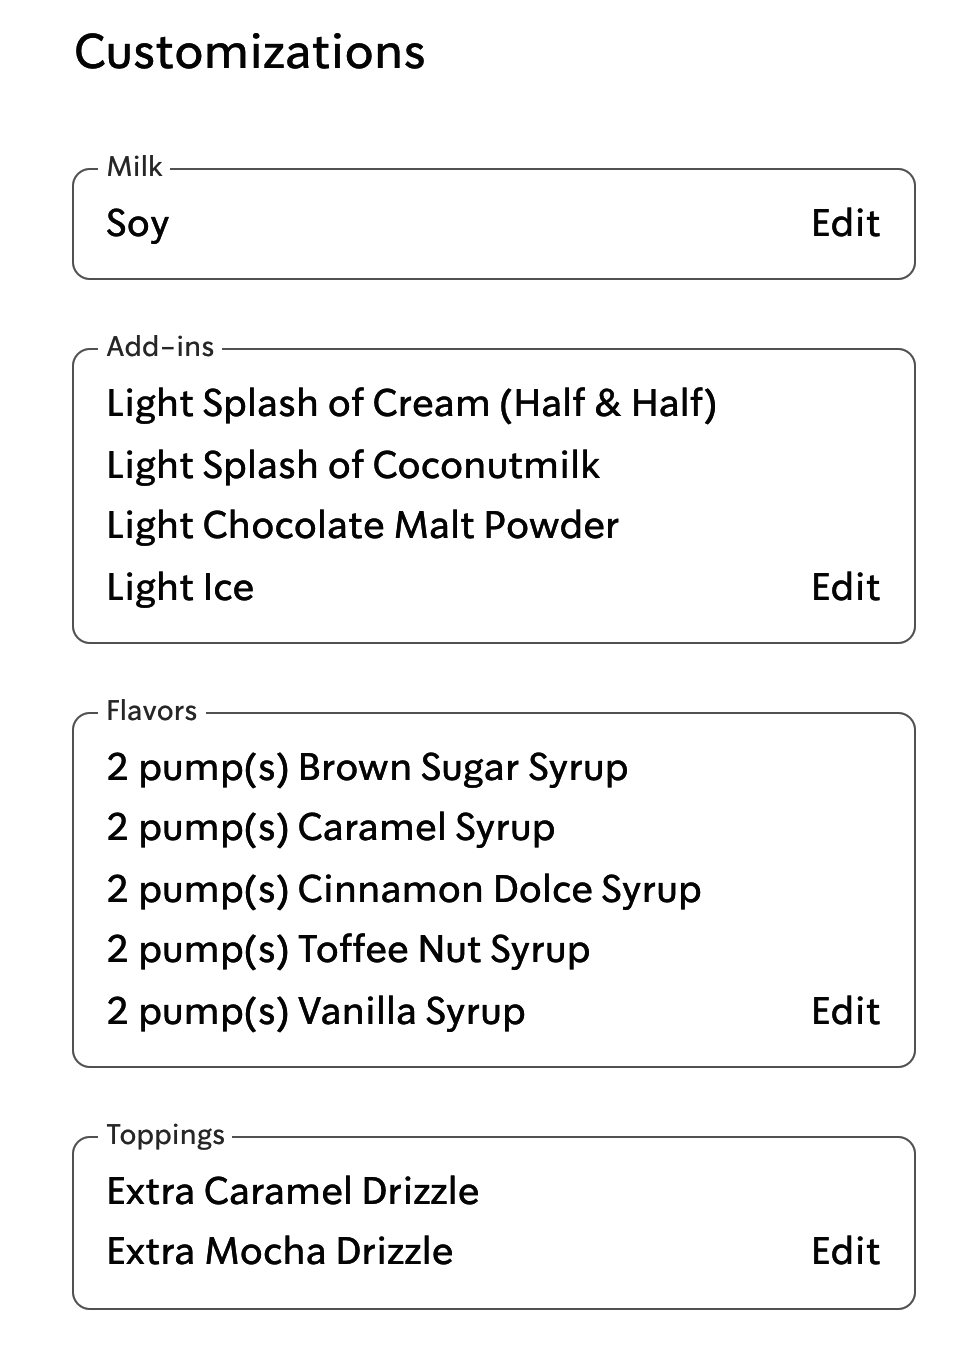 A screenshot of a starbucks order form with may substitutions, like soy milk, splashes of many creams/milks, pumps of five different kinds of syrup, and extra drizzles on top